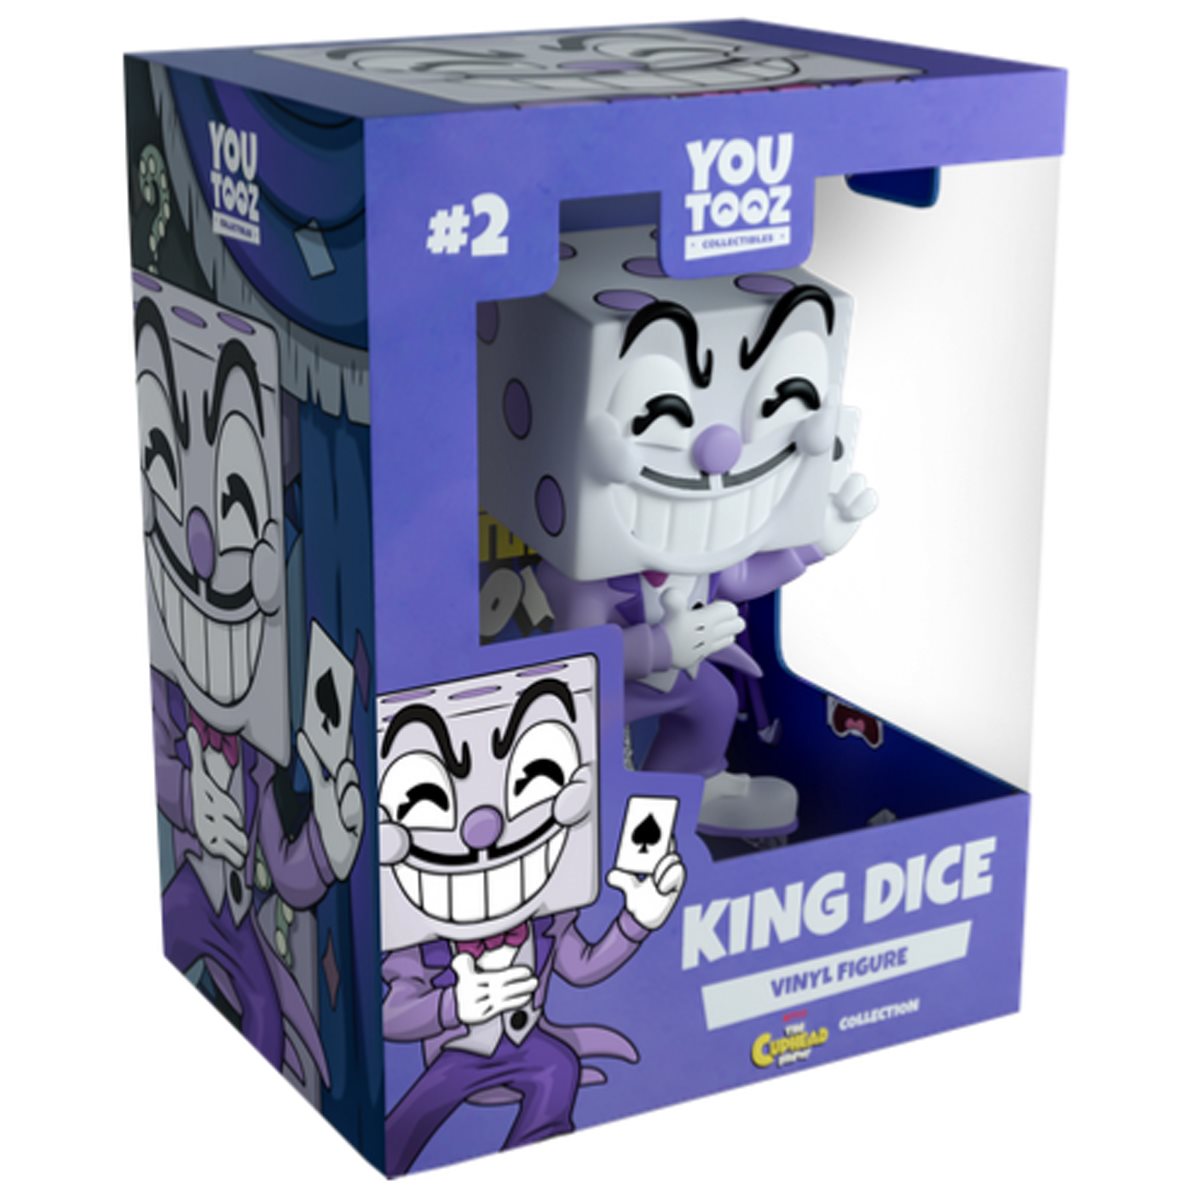 Funko Pop! Games: Cuphead S1- King Dice (Styles May Vary) Collectible Figure